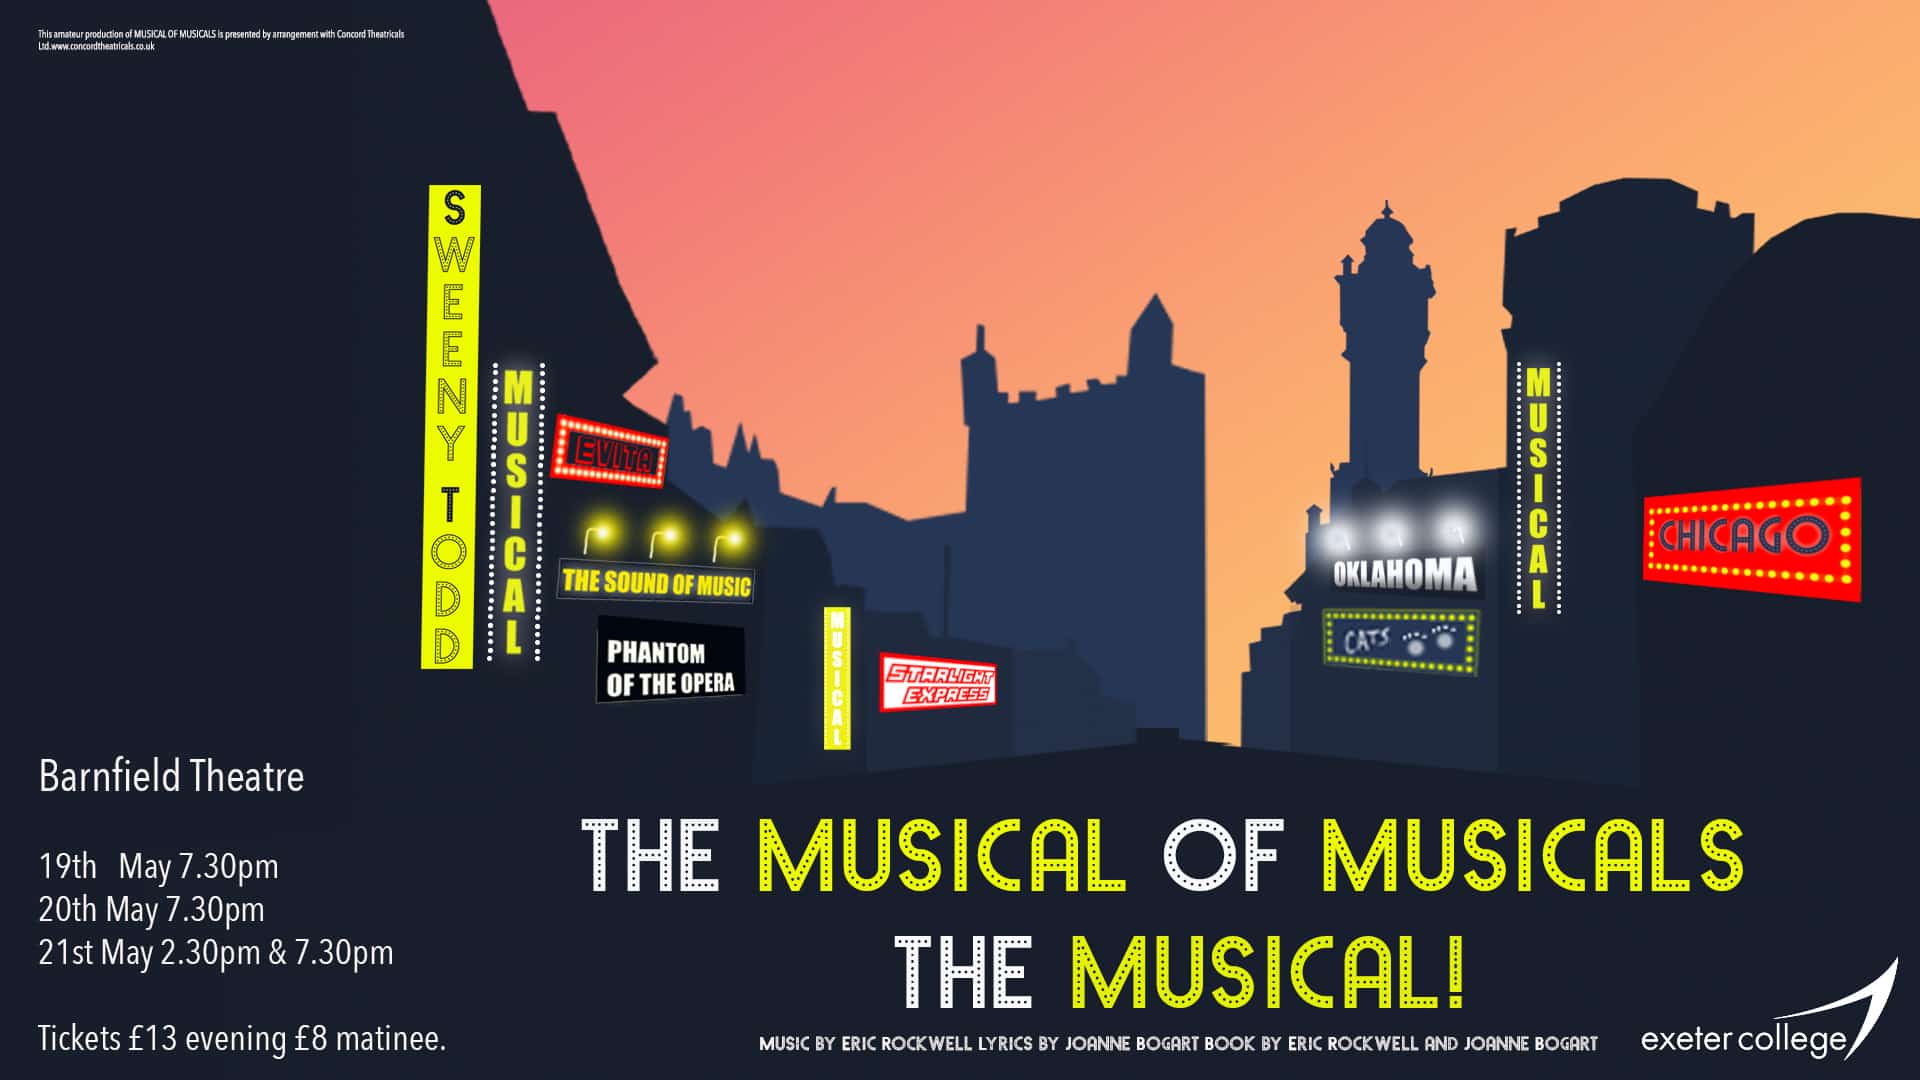 THE MUSICAL OF MUSICALS THE MUSICAL illustration of a city at night, with famous musicals advertised on the buildings in big letters